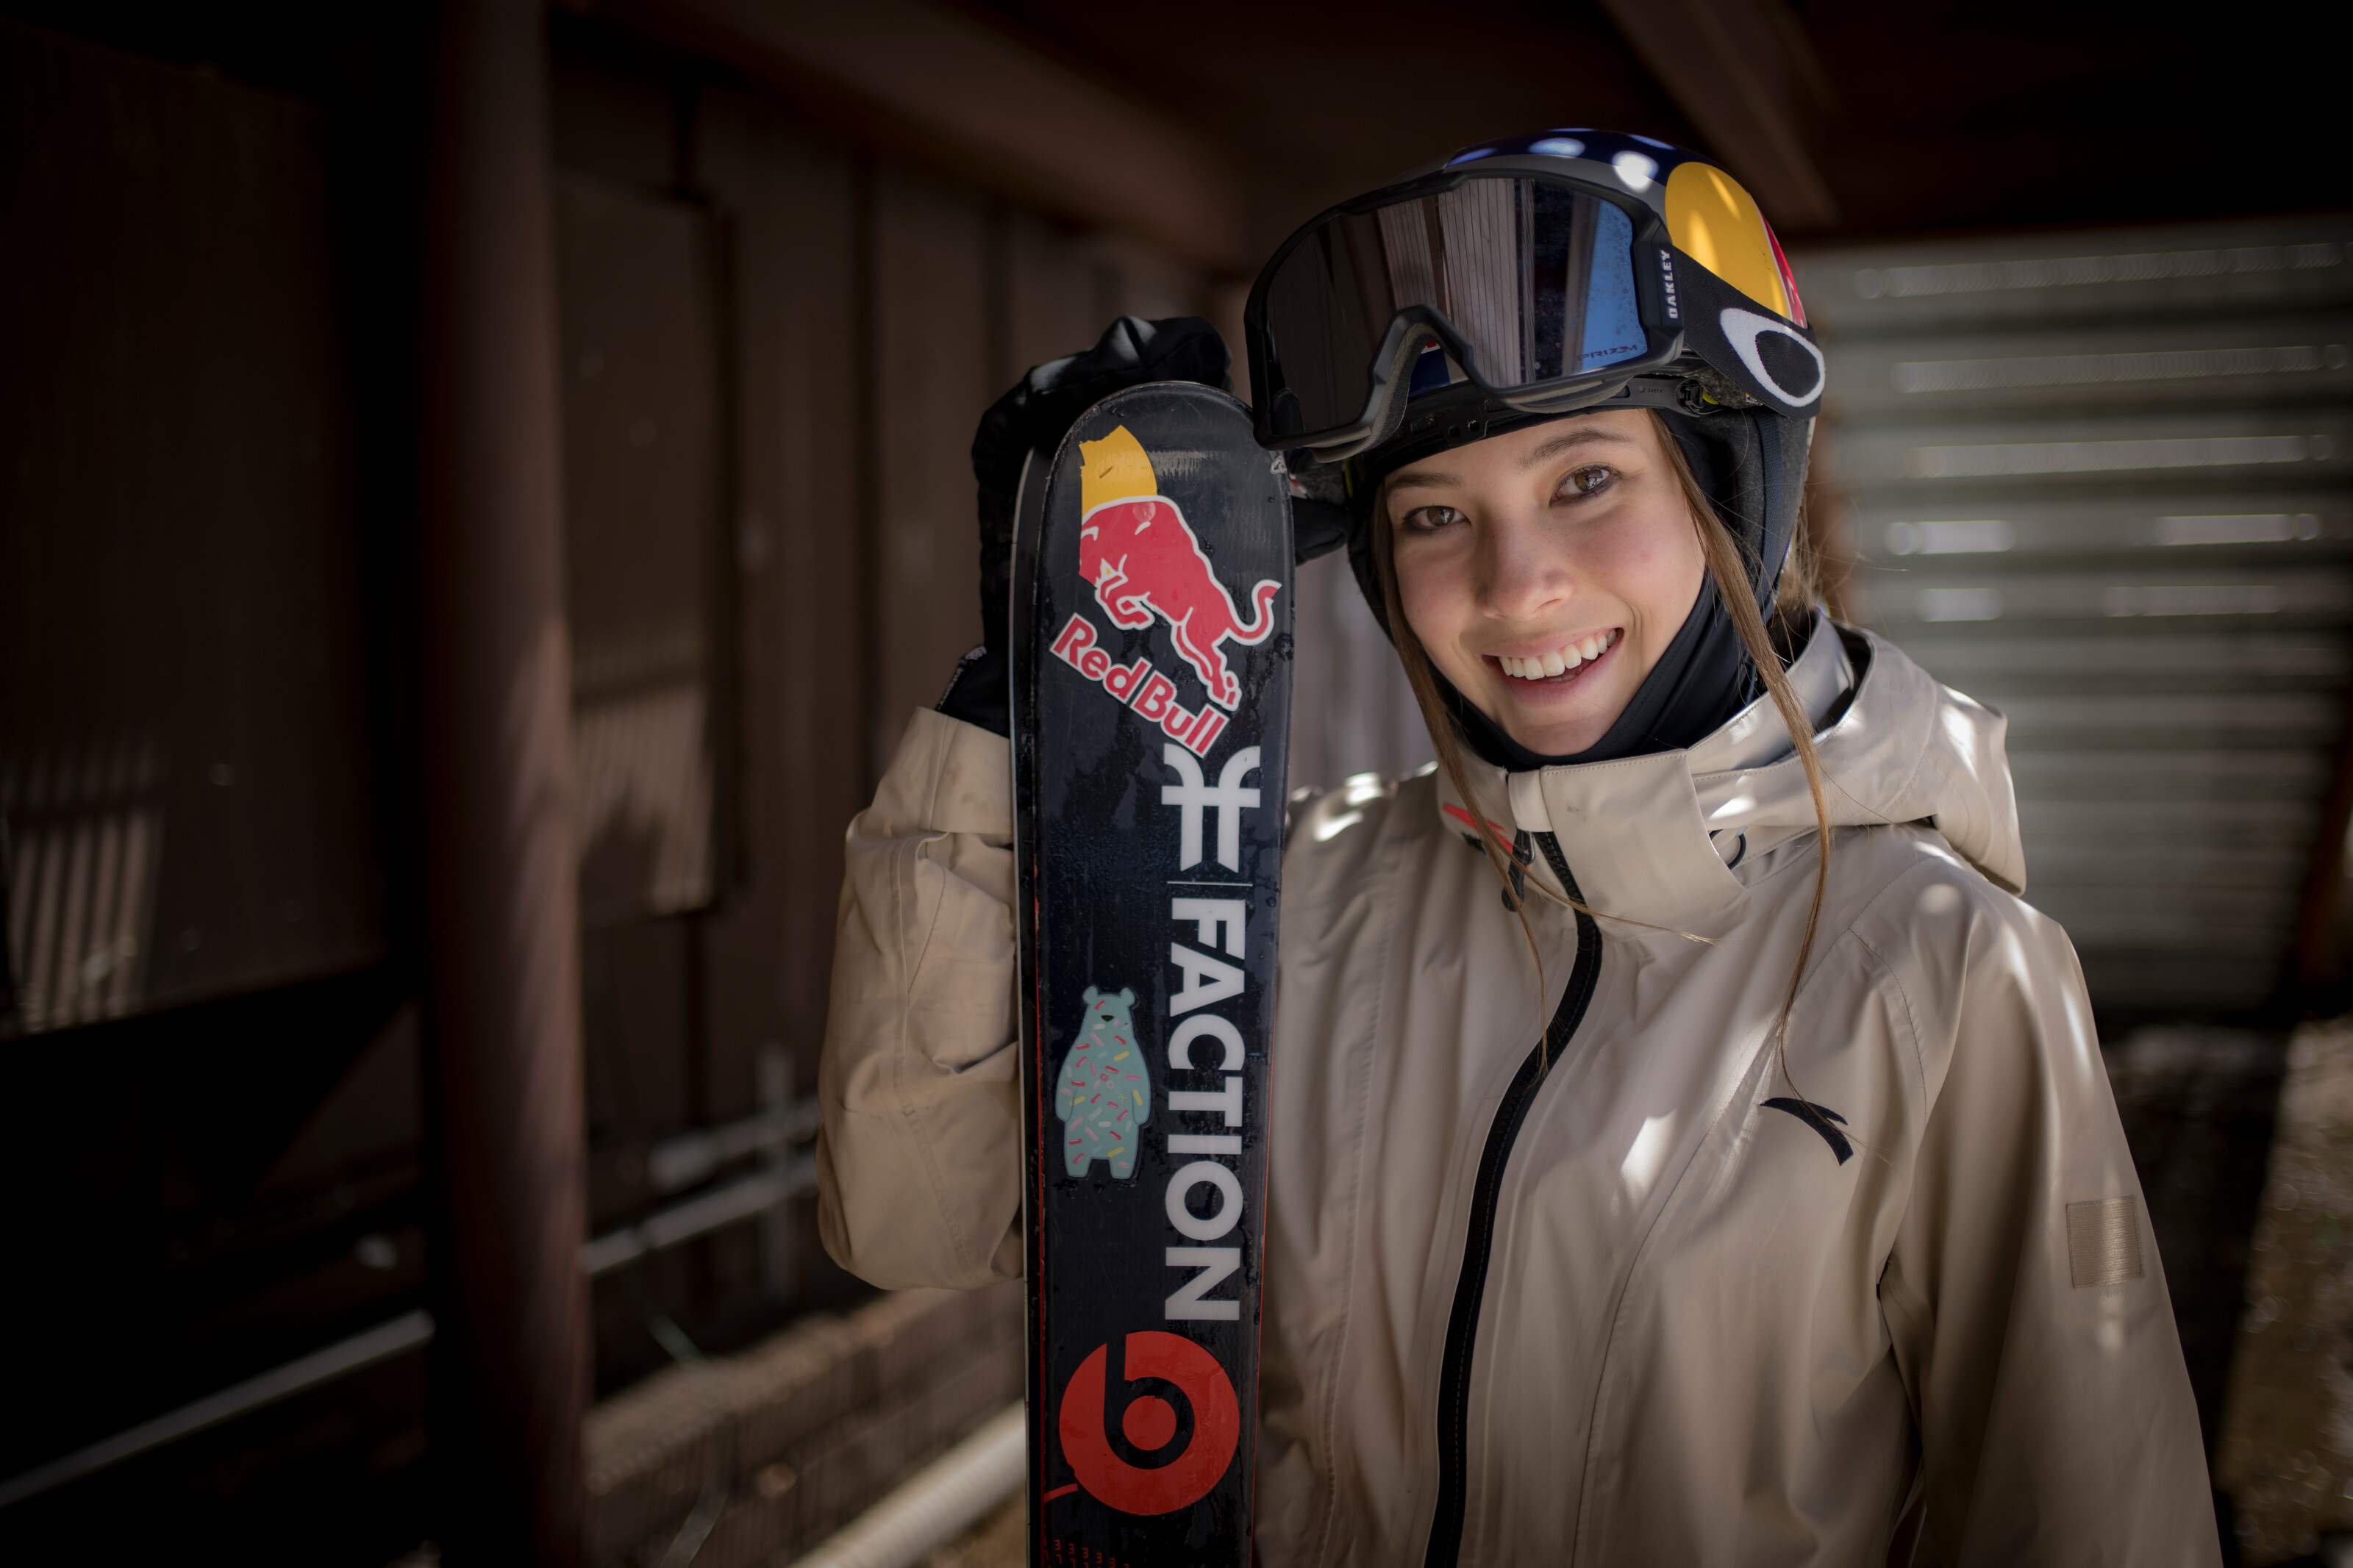 Eileen Gu: Olympic gold medal skier, Louis Vuitton model and now